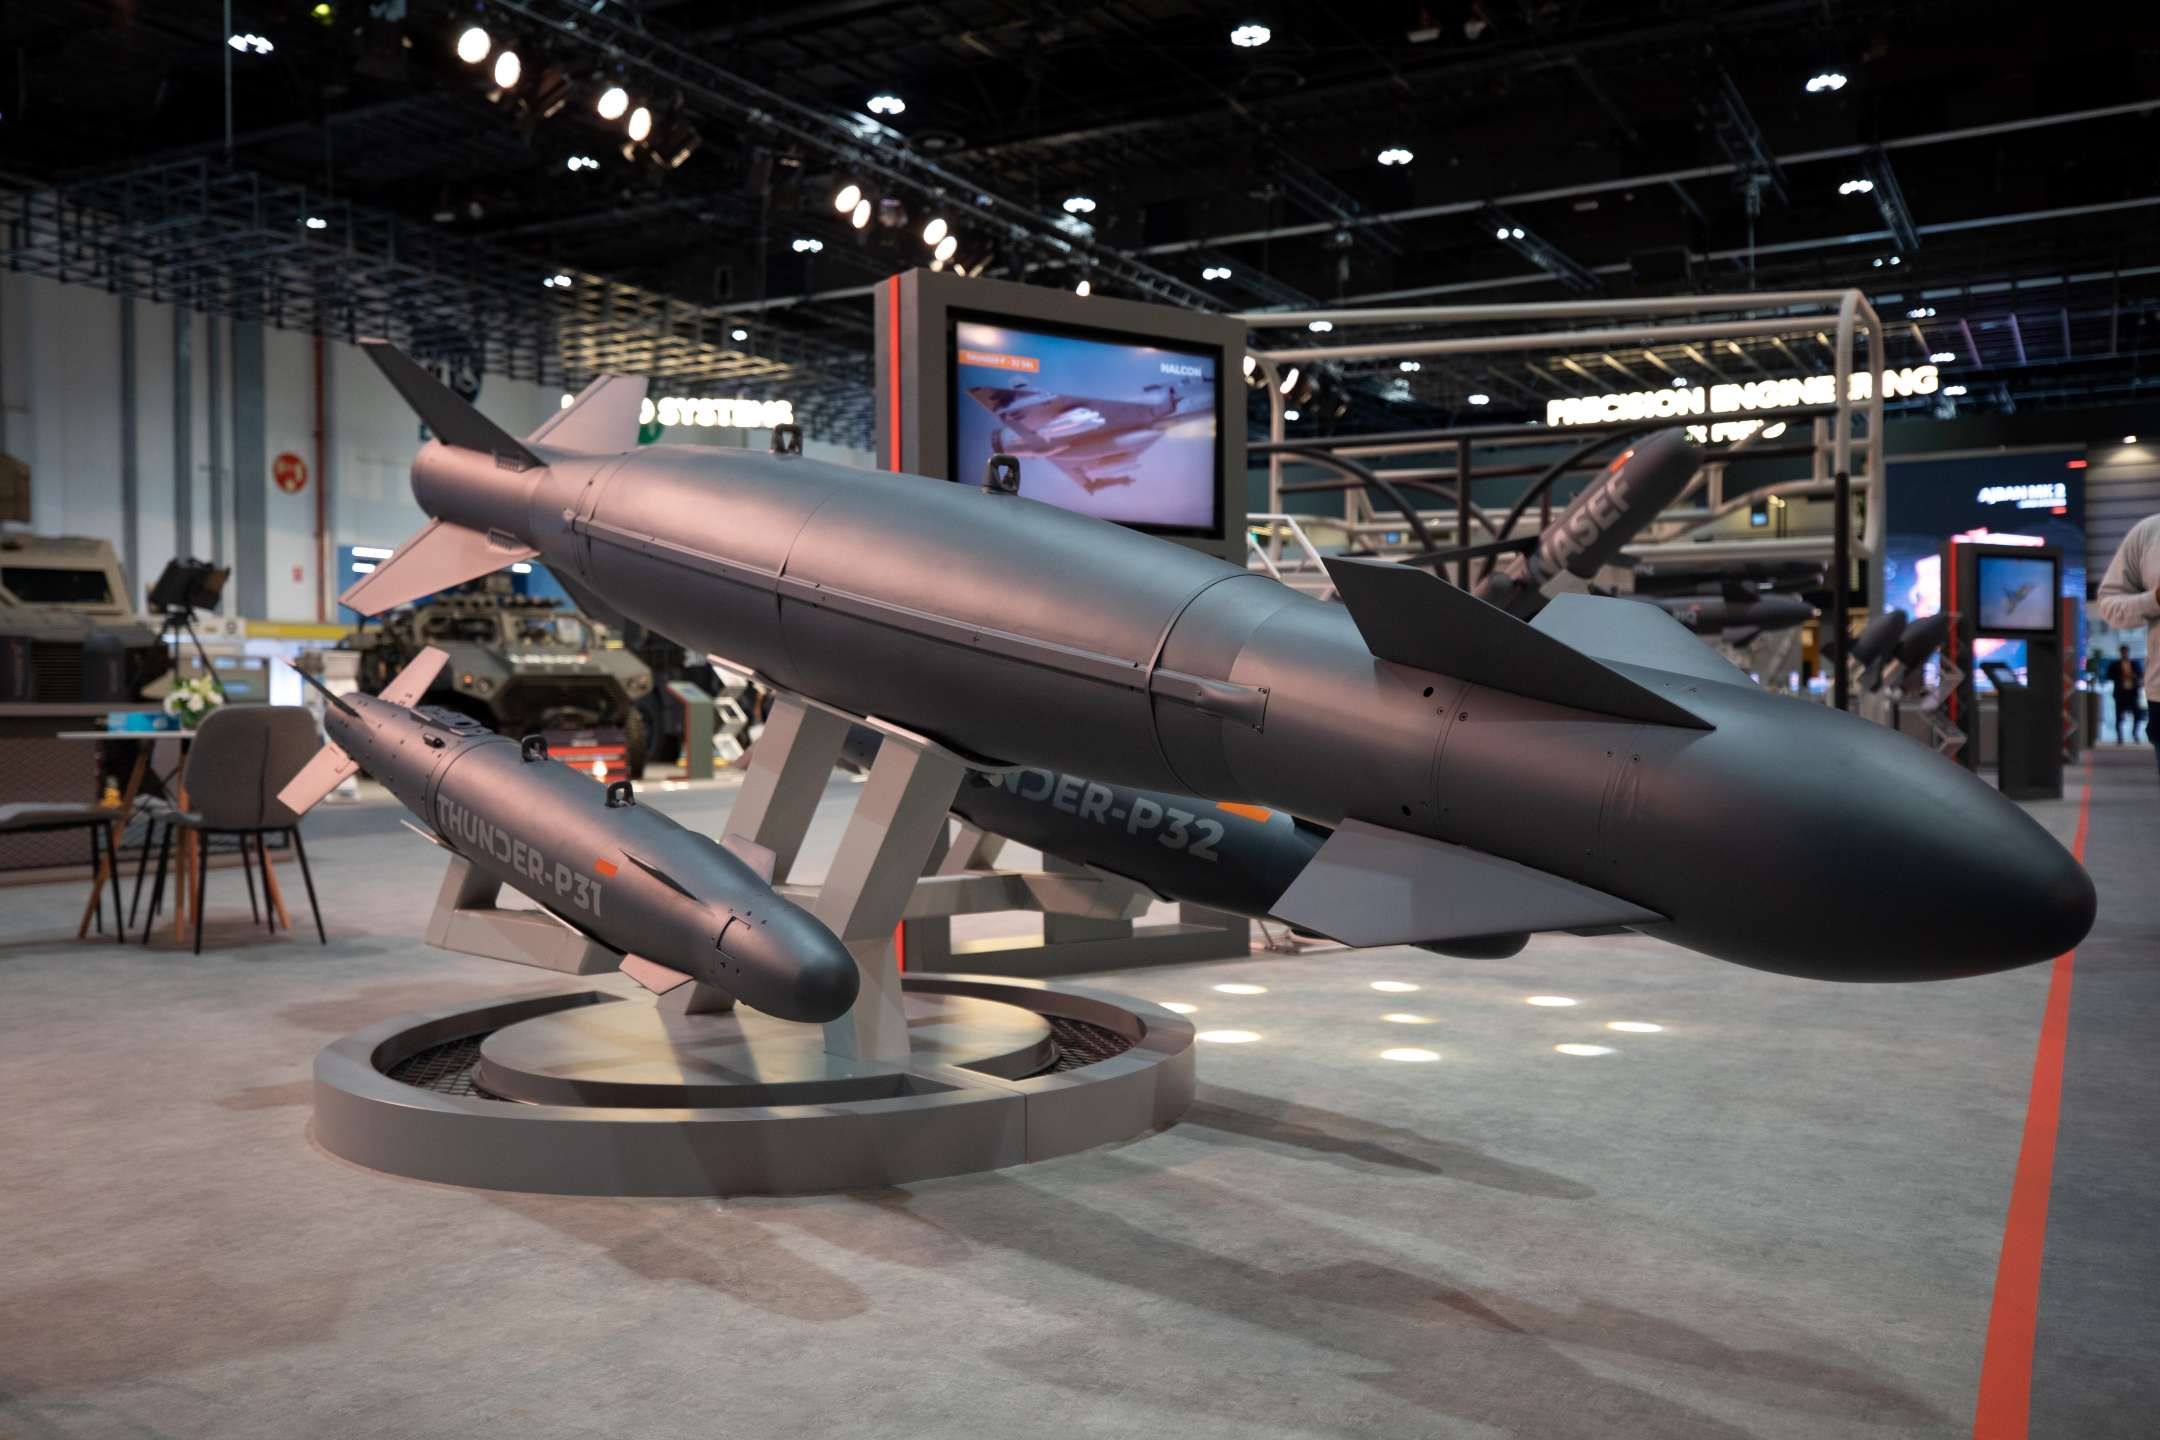 Halcon's Thunder P3 Light precision-guided munition displayed at IDEX 2023. Photo: Edge Group